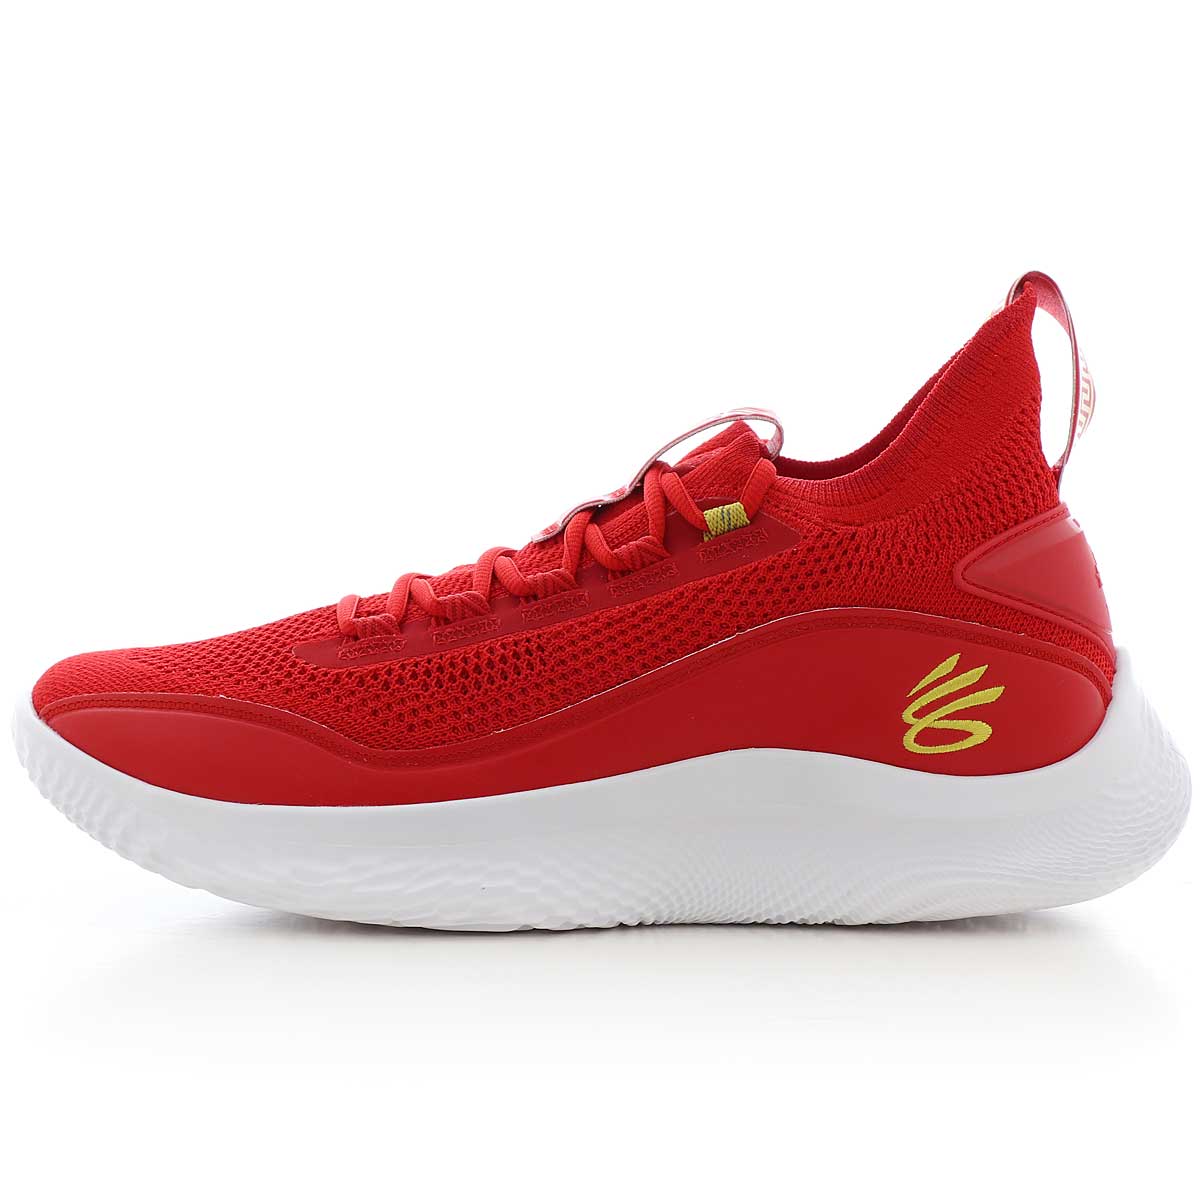 Buy CURRY 8 CNY for N/A 0.0 on KICKZ.com!